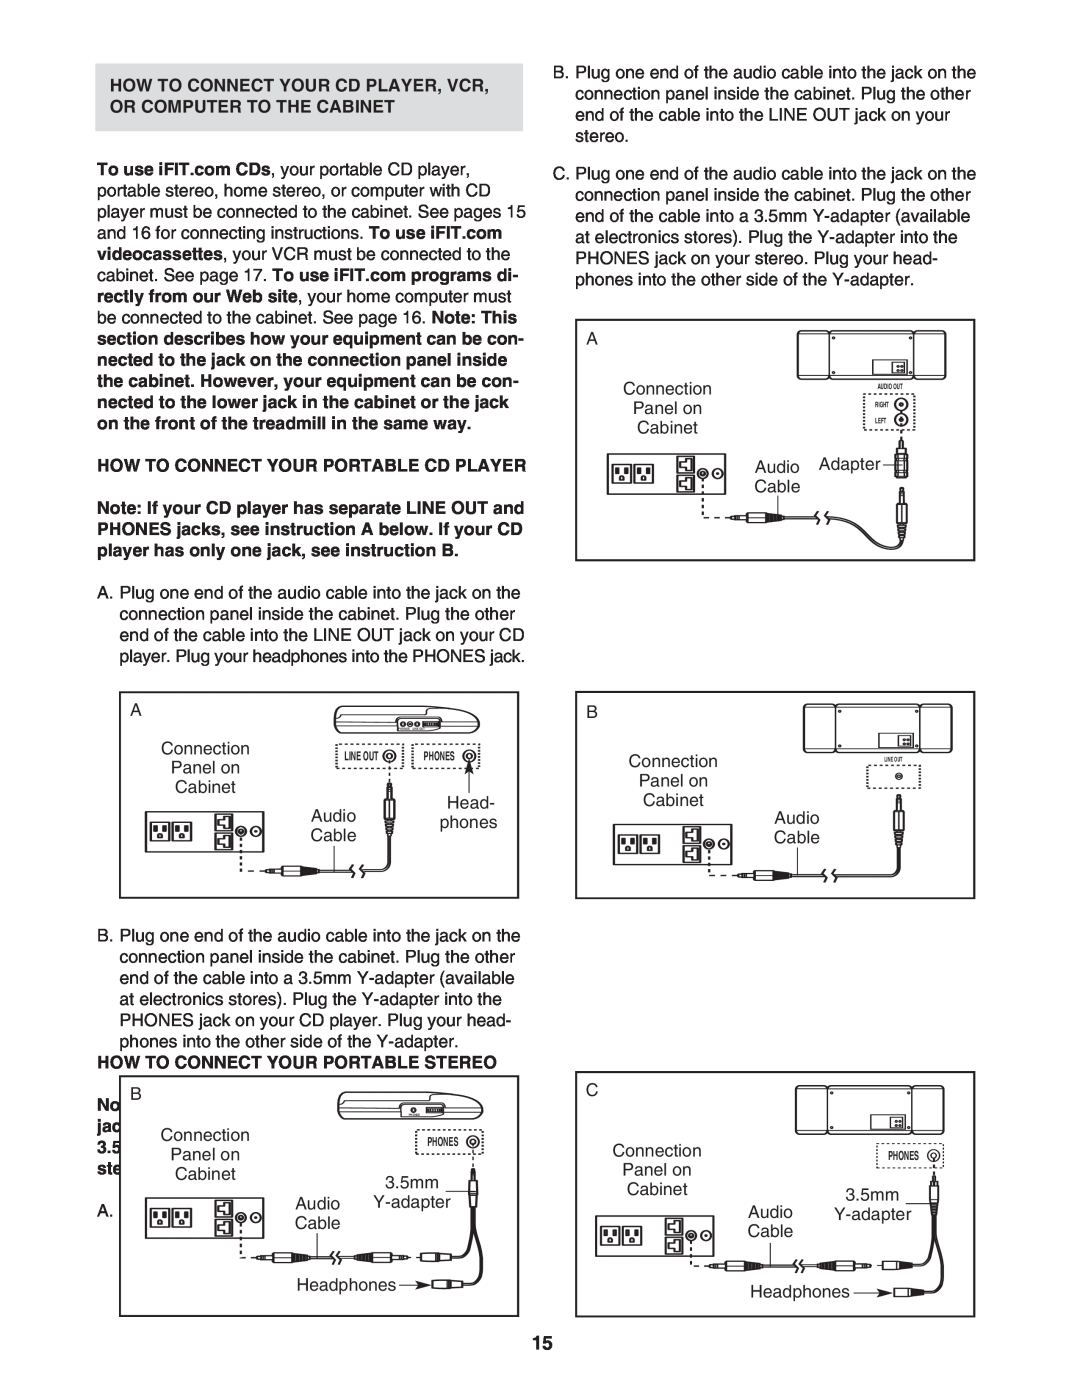 ProForm HGTL09111M How To Connect Your Cd Player, Vcr, Or Computer To The Cabinet, How To Connect Your Portable Cd Player 